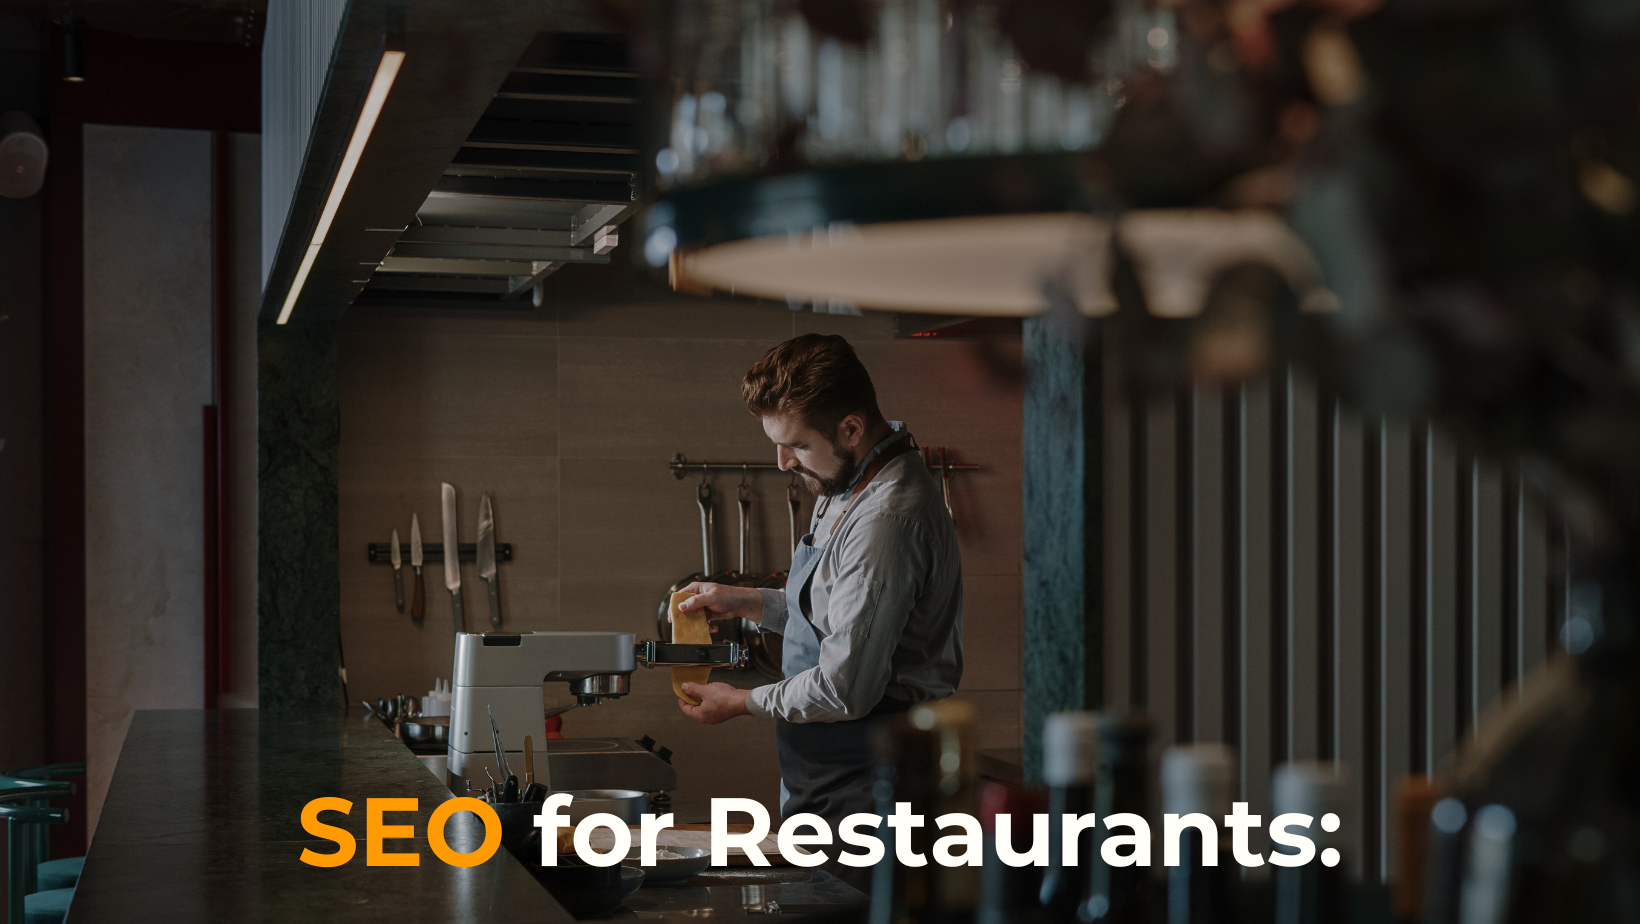 SEO for Restaurants: Master and Optimizing Your Website to Rank #1 and Attract More Clients